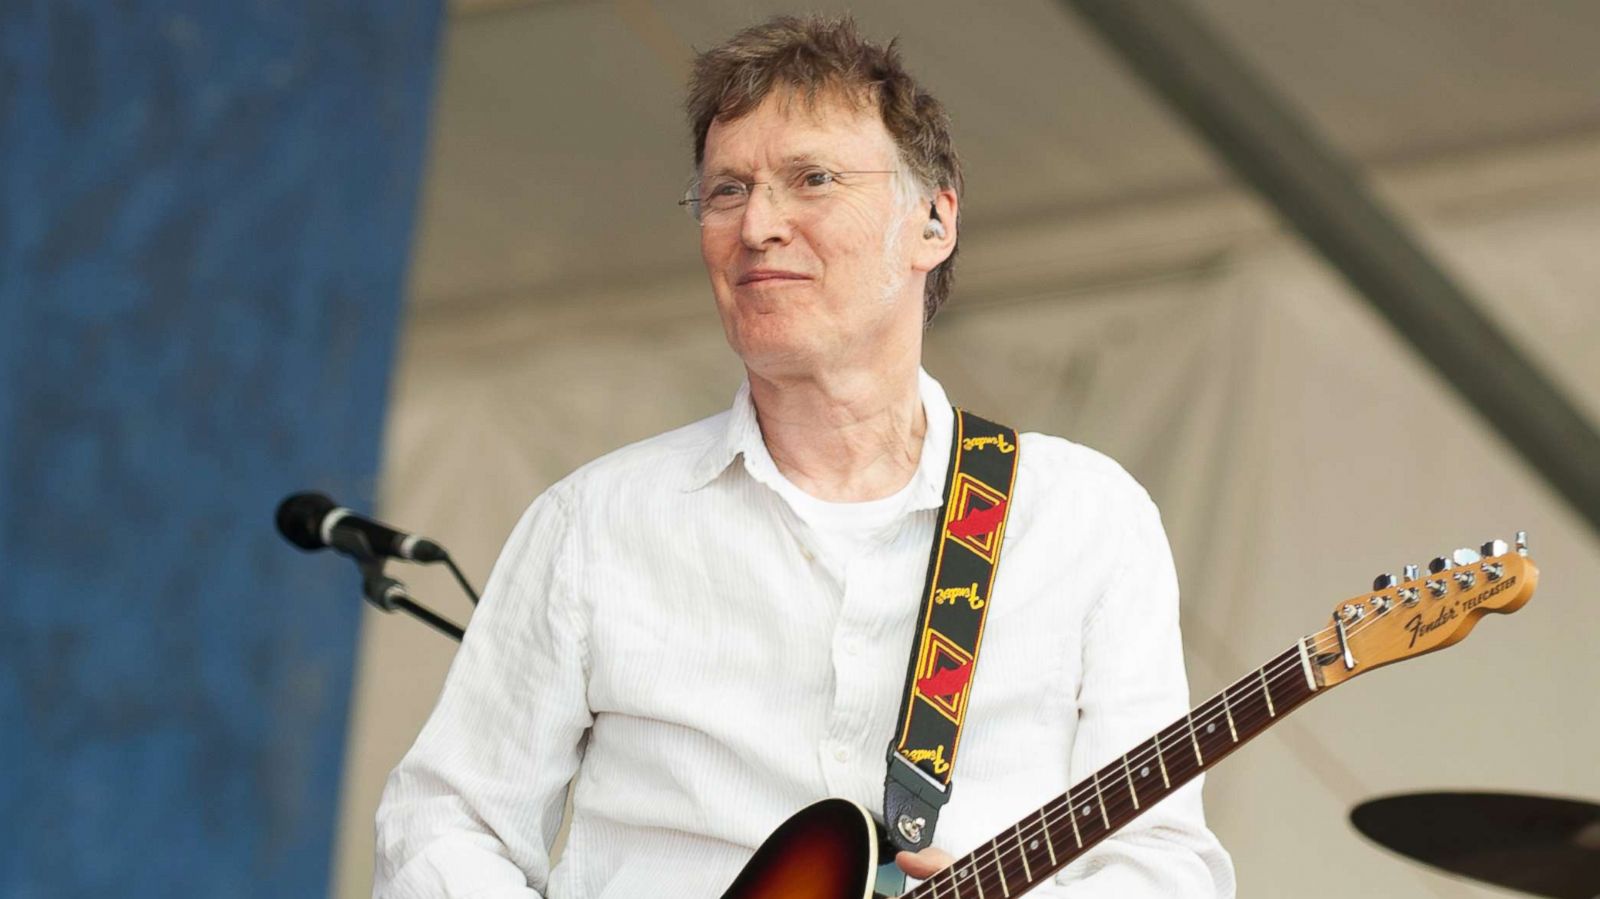 Steve Winwood Net Worth - From Traffic To Solo Success